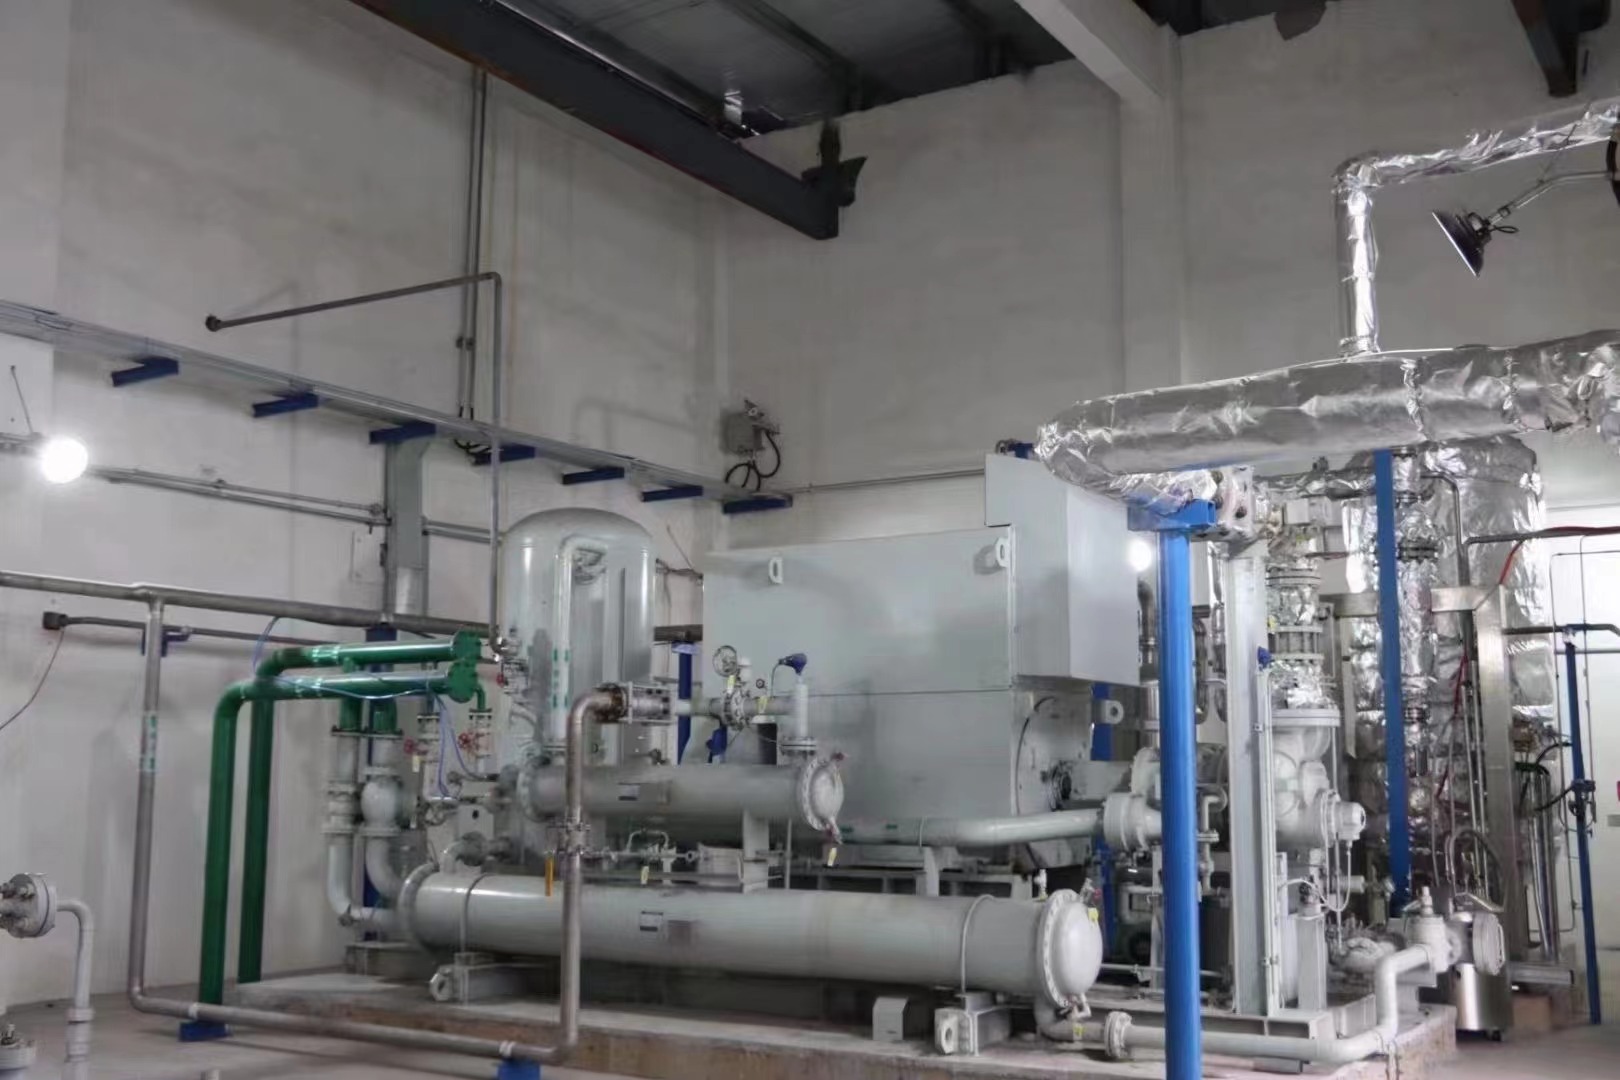 The First 1.5 t/d Hydrogen Liquefier of FULLCRYO successfully Started Up and Produced 99.9999% Liquid Hydrogen